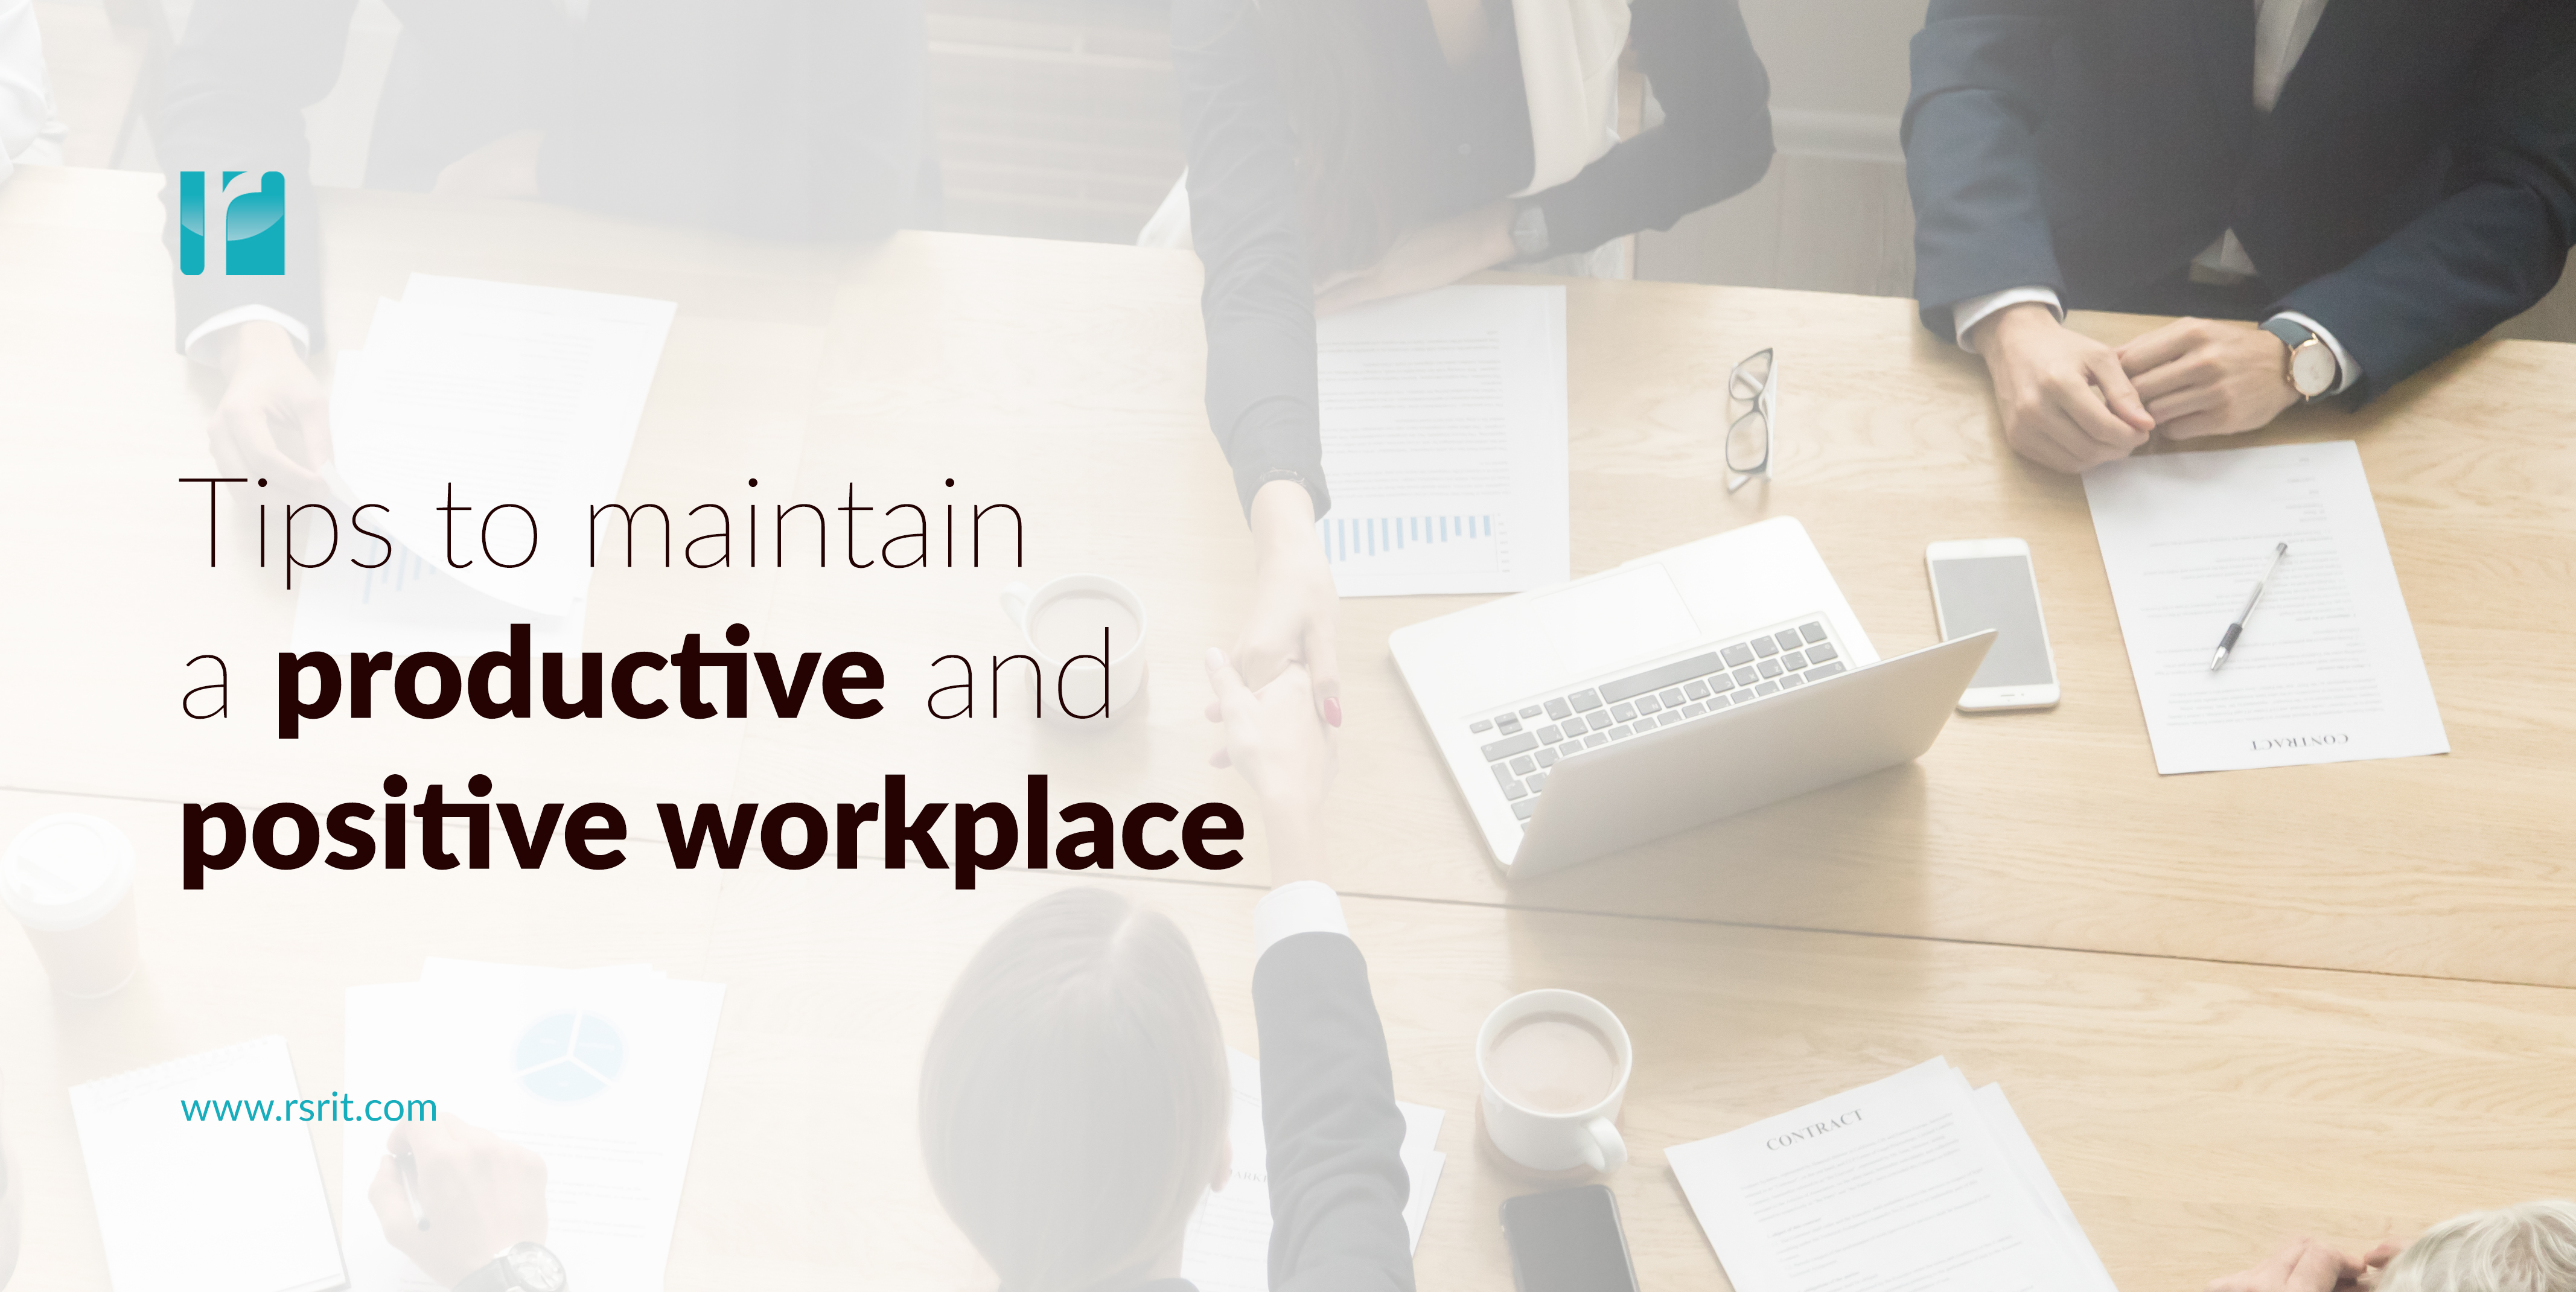 Tips to Maintain a Productive and Positive Workplace